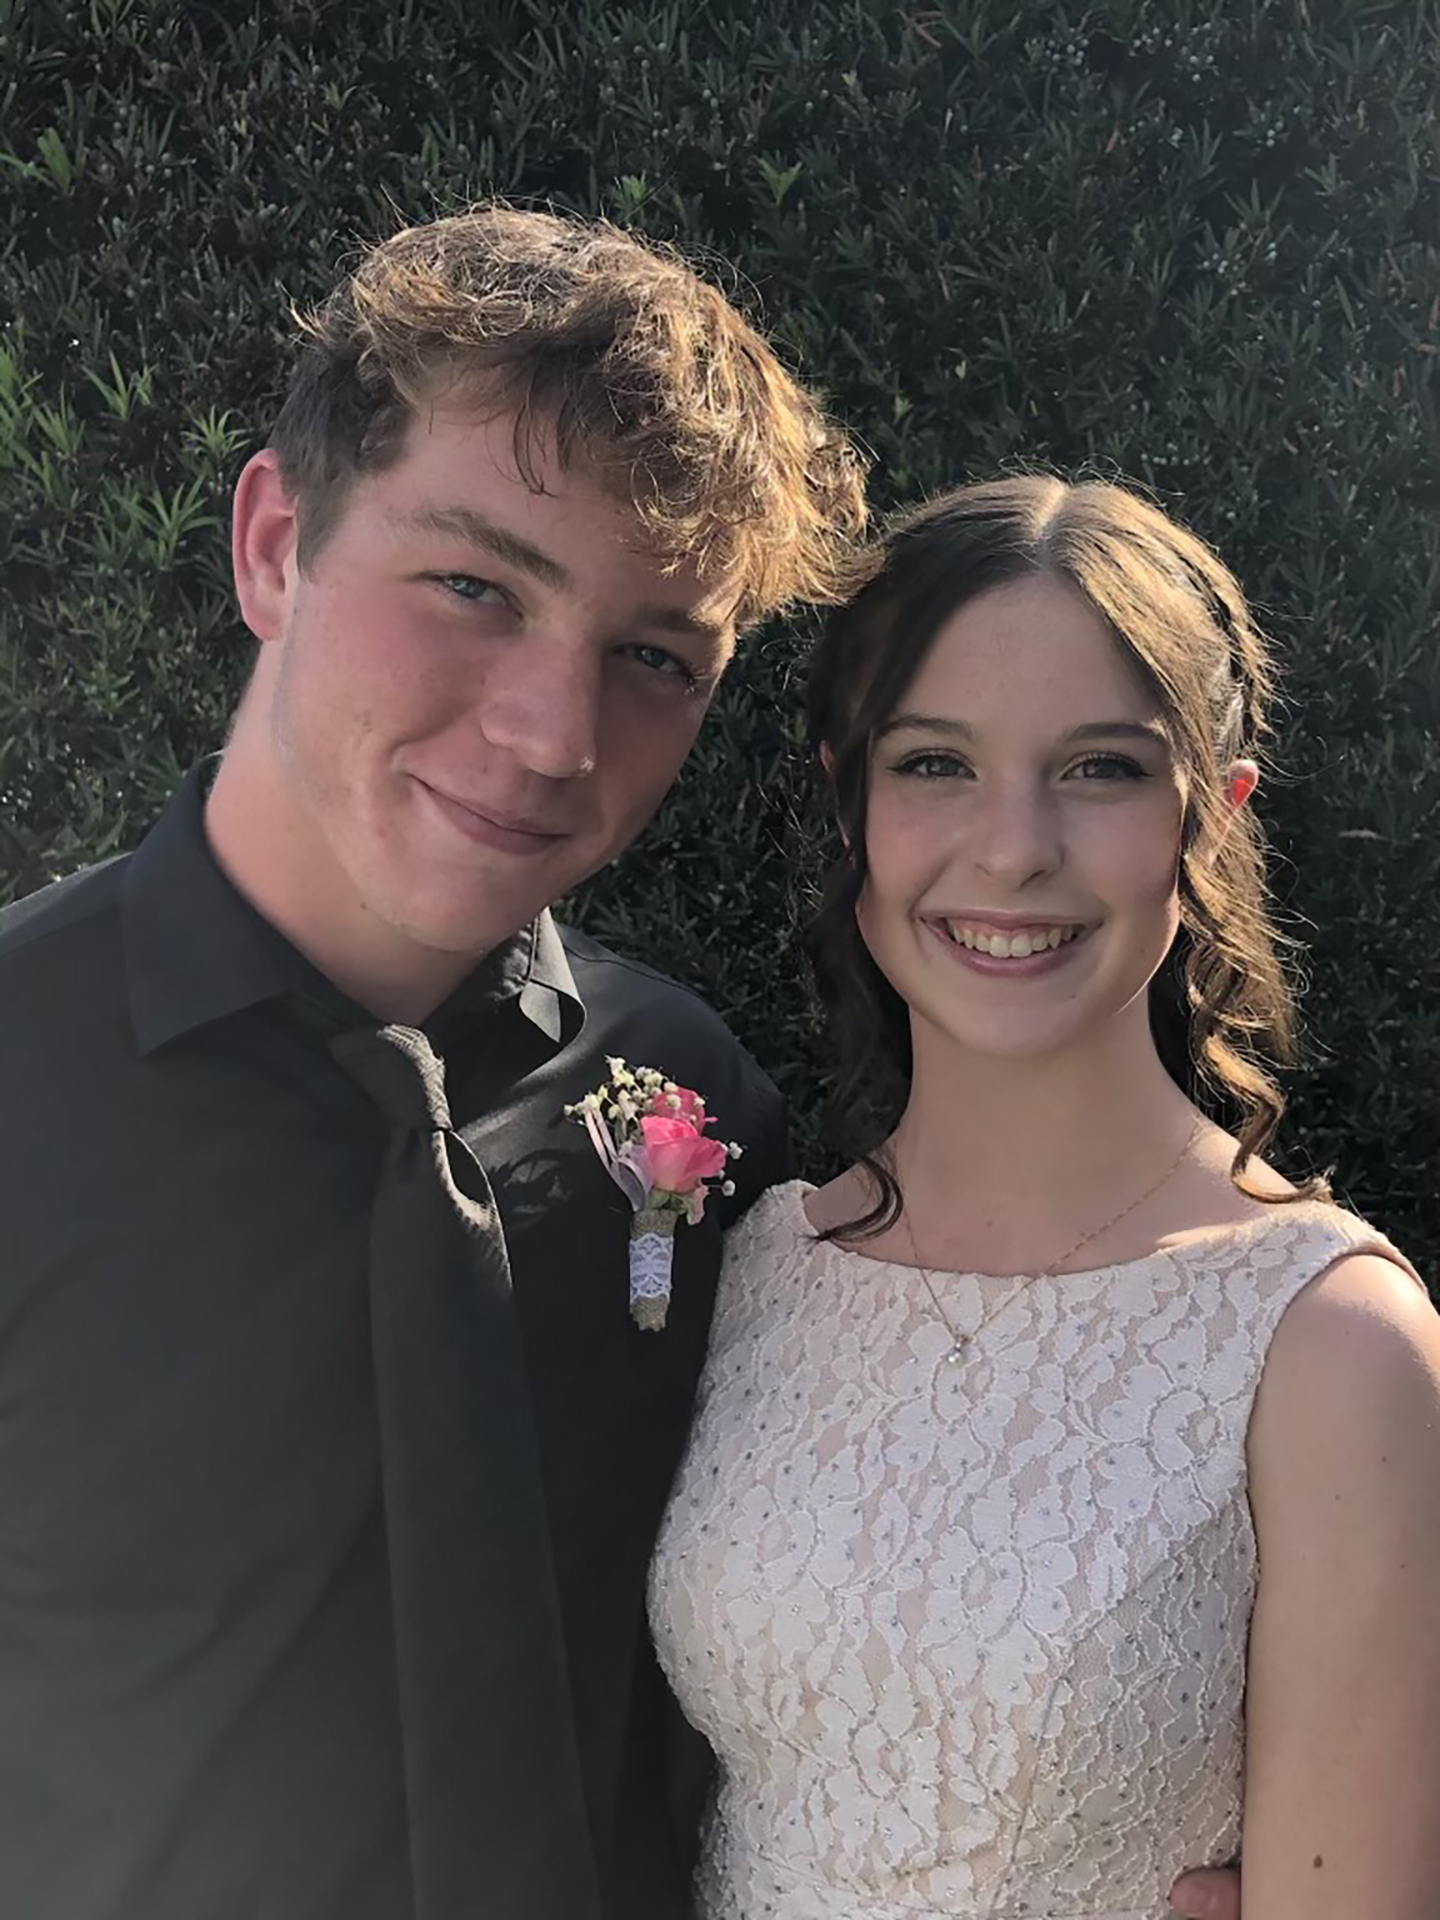 Evan Dangler and Haley Dragon, who are seniors at Braden River High School, were disappointed when prom was canceled last year, so they had their own prom. This year, they look forward to going to prom with friends. Courtesy photo